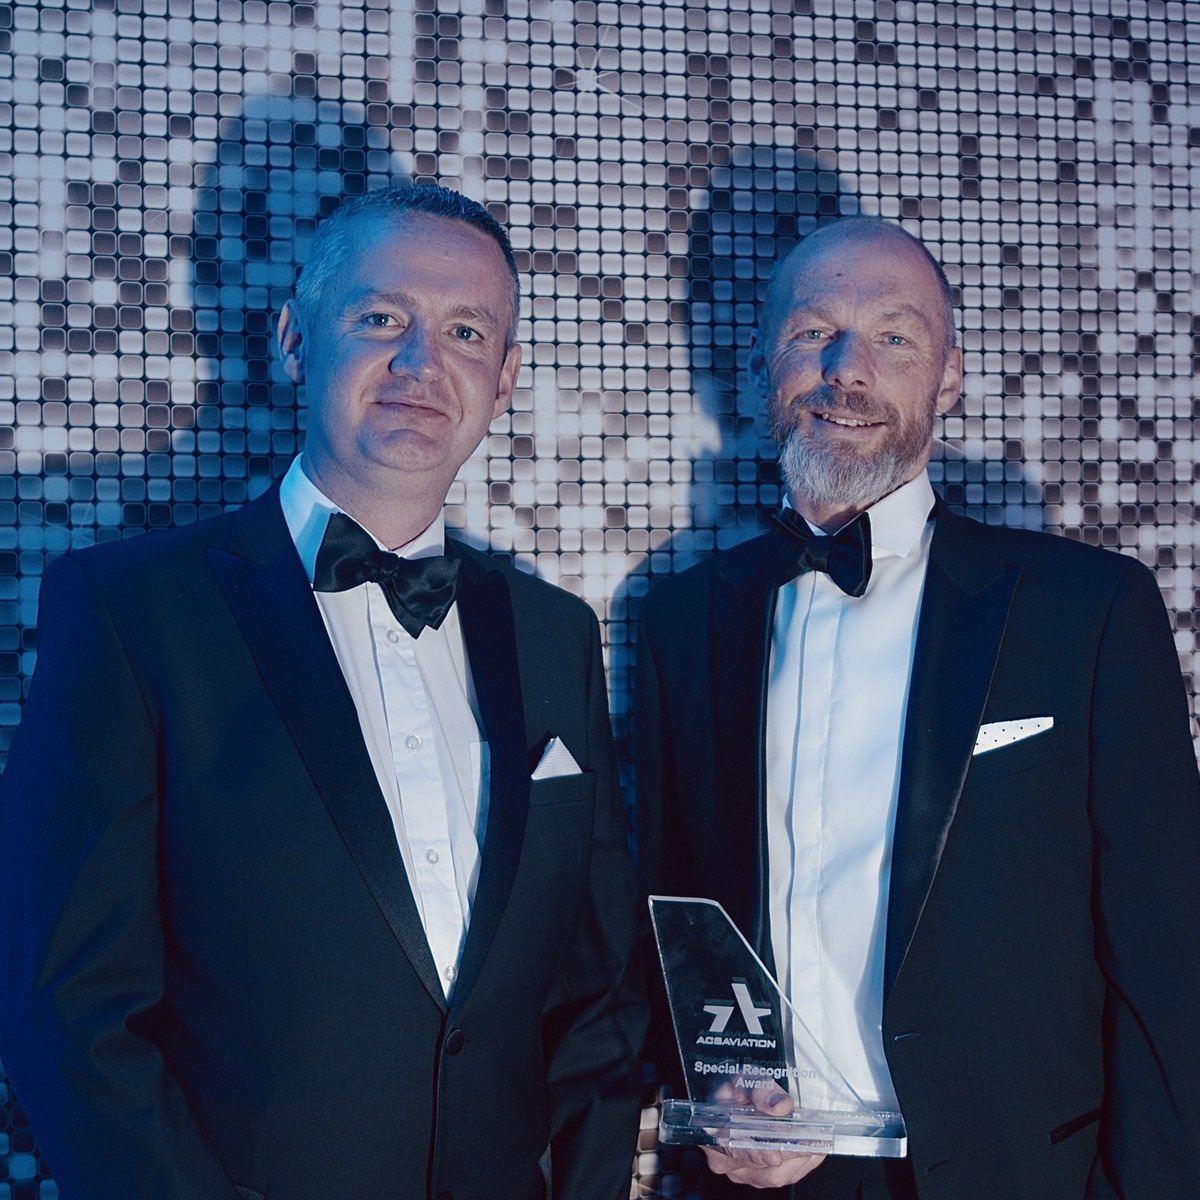 Congratulations to Head of Training Philip Morritt on winning our Special Recognition Award 2023 at the ACS Aviation Annual Awards Dinner. Philip was recognised for his dedication and commitment to the company over the past 11 years. This award was presented by Craig Ewart